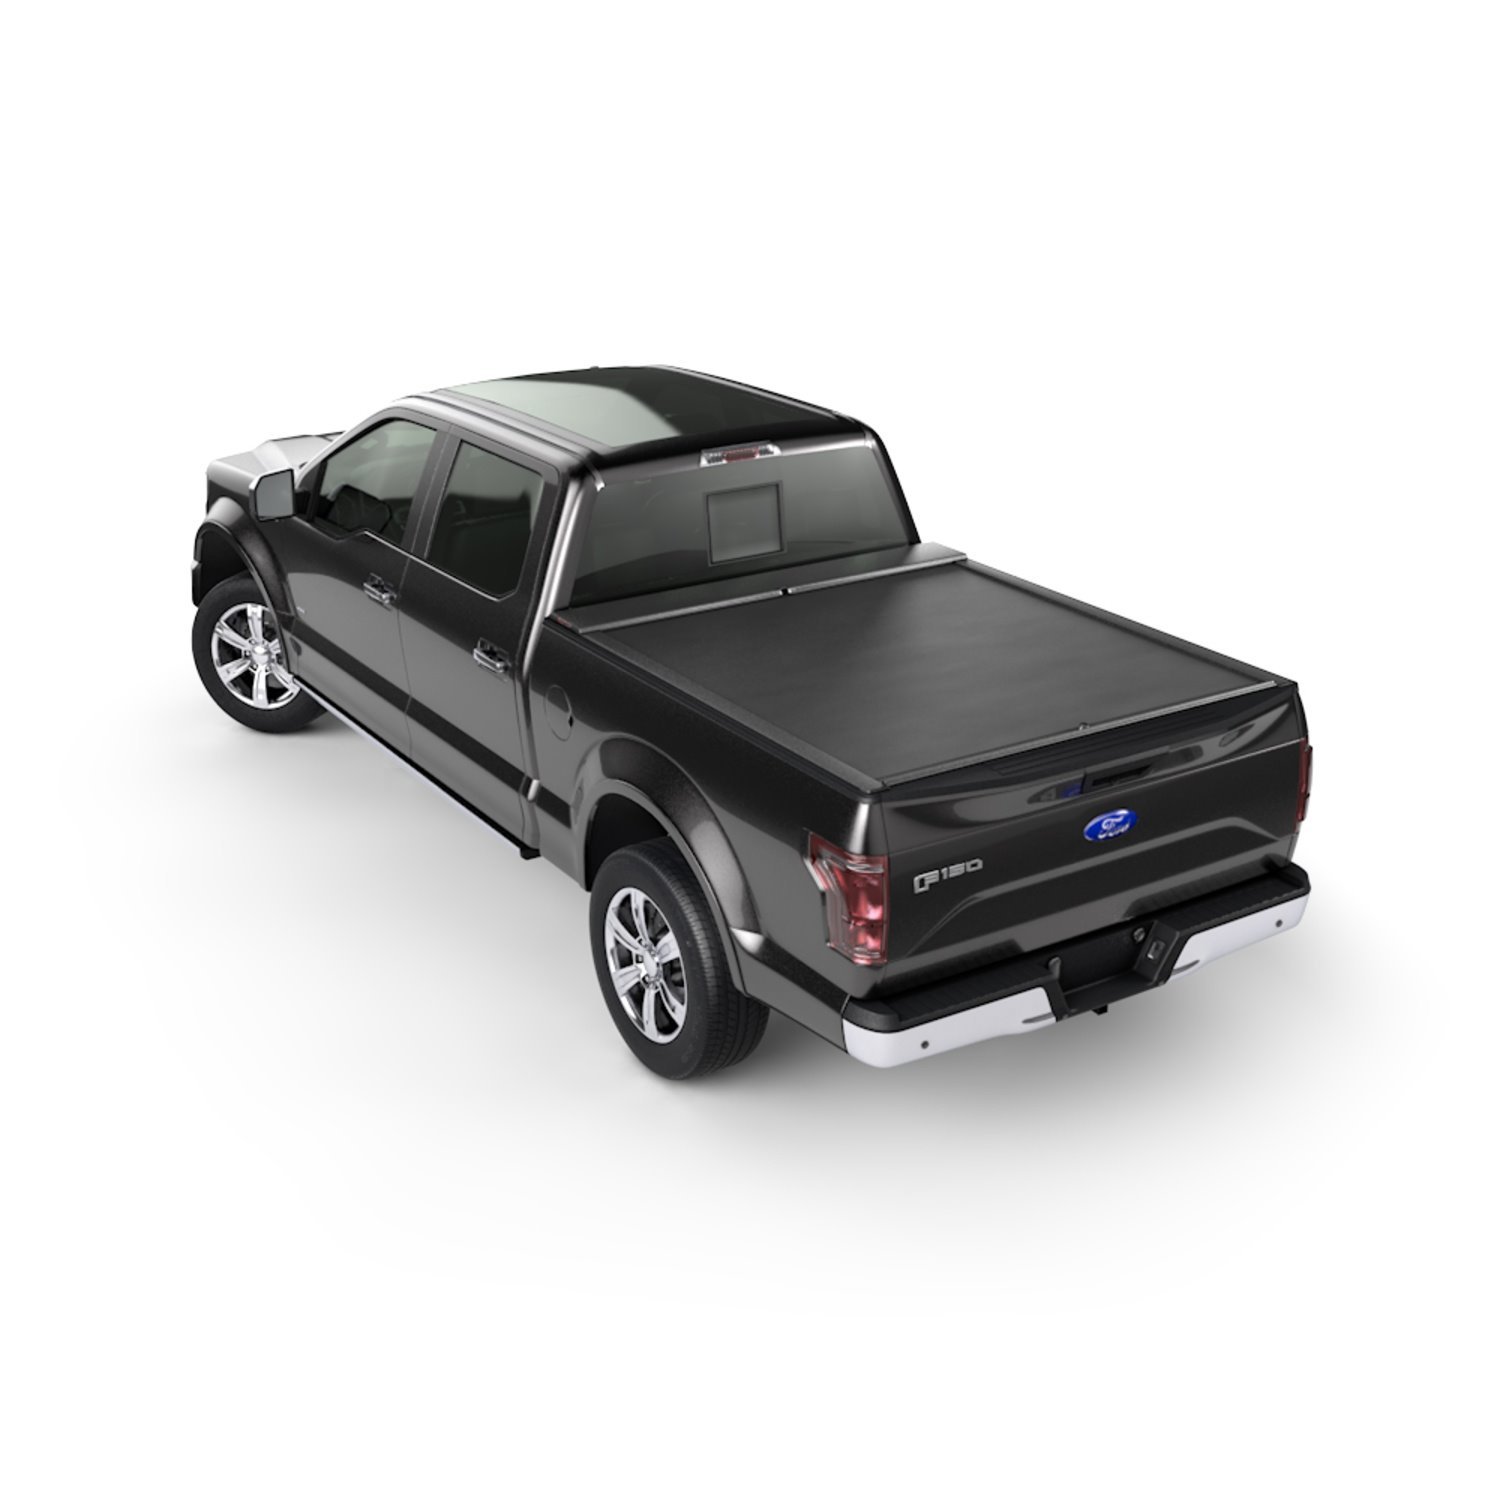 LG101M M-Series Locking Retractable Truck Bed Cover for 2015-2020 Ford F-150 [5.7 ft. Bed]